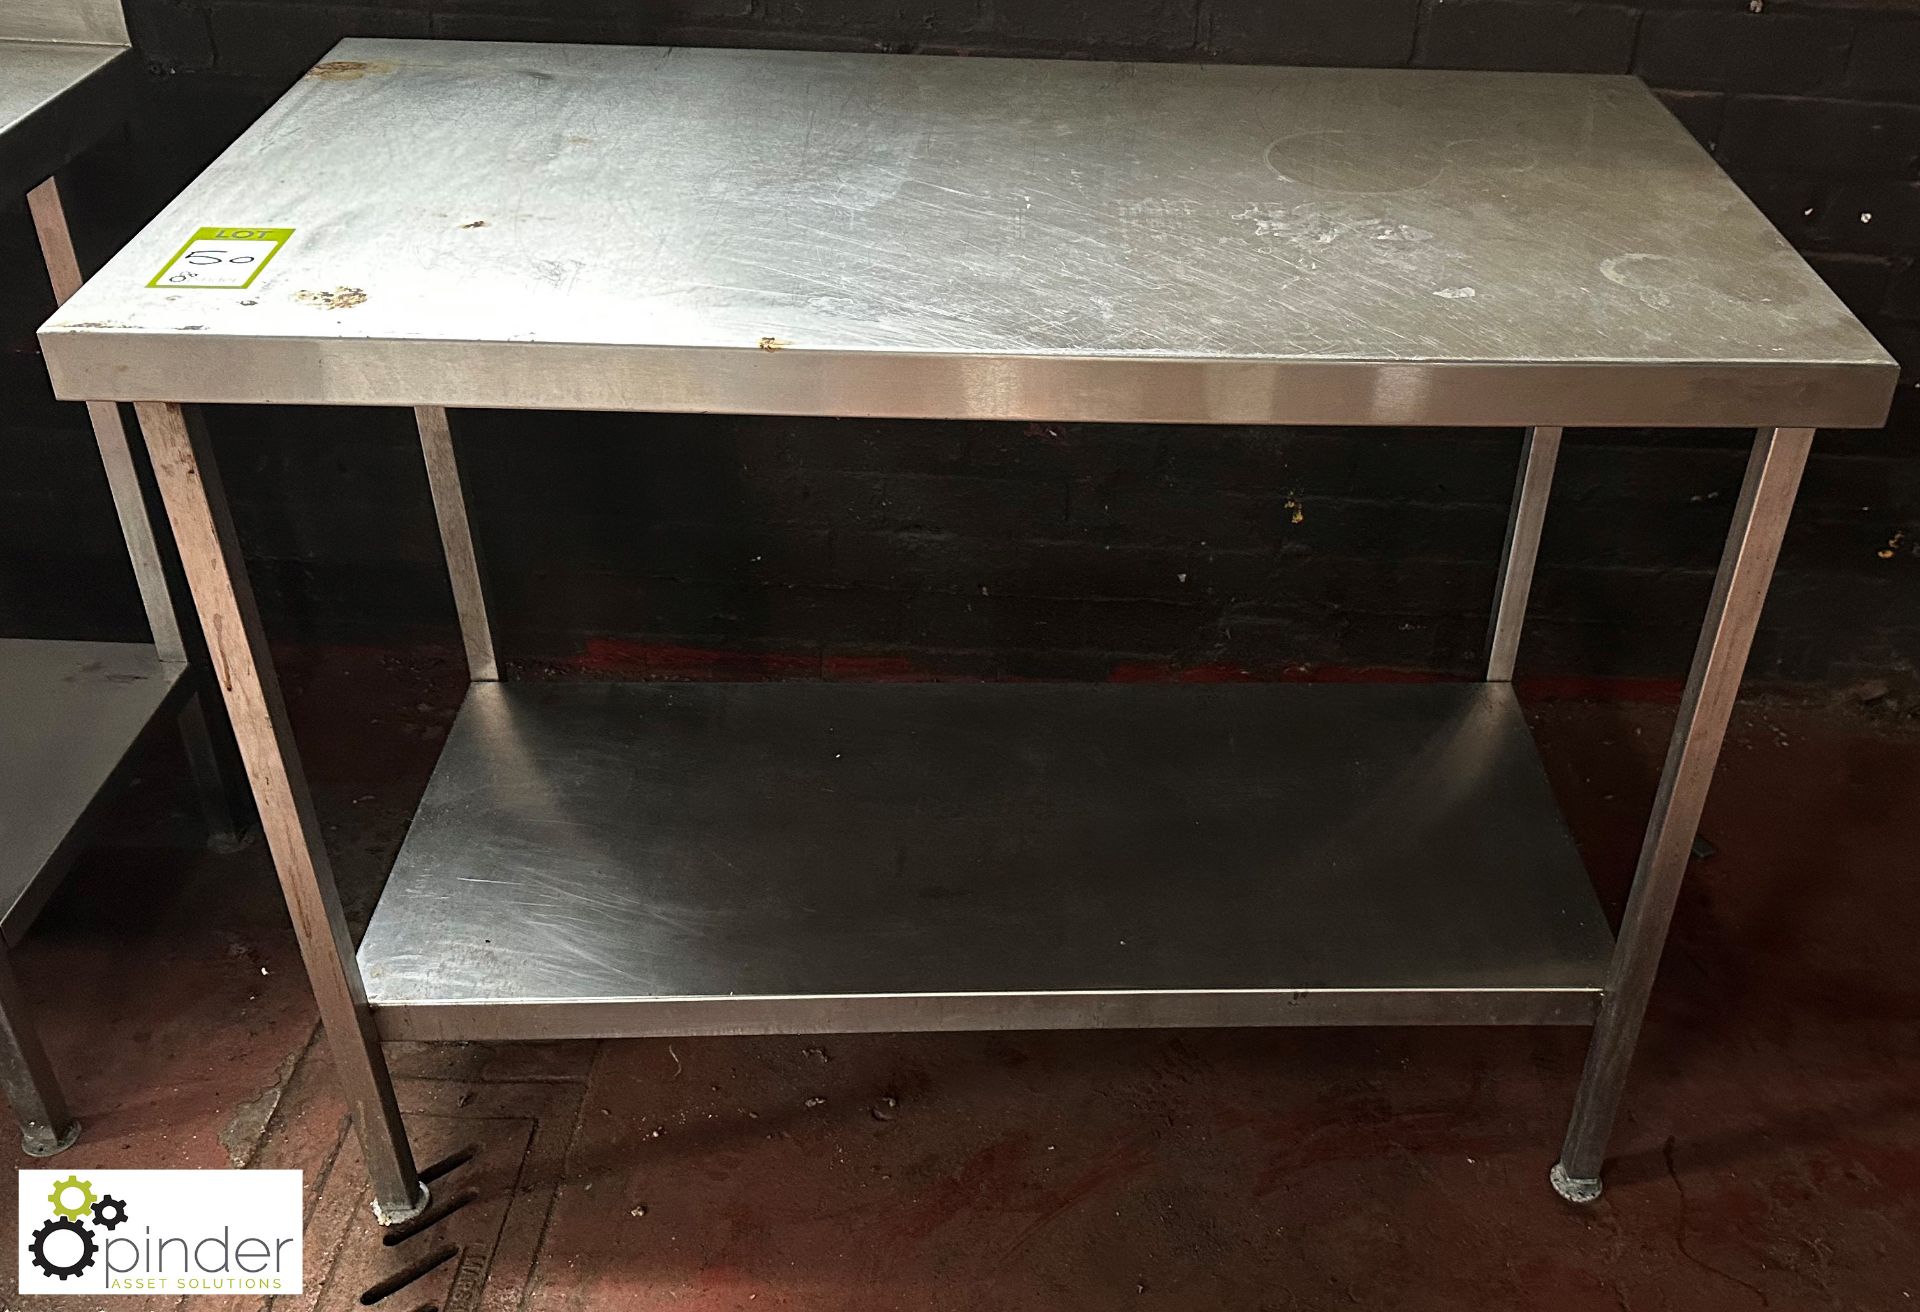 Stainless steel Preparation Table, 1200mm x 640mm x 900mm, with under shelf